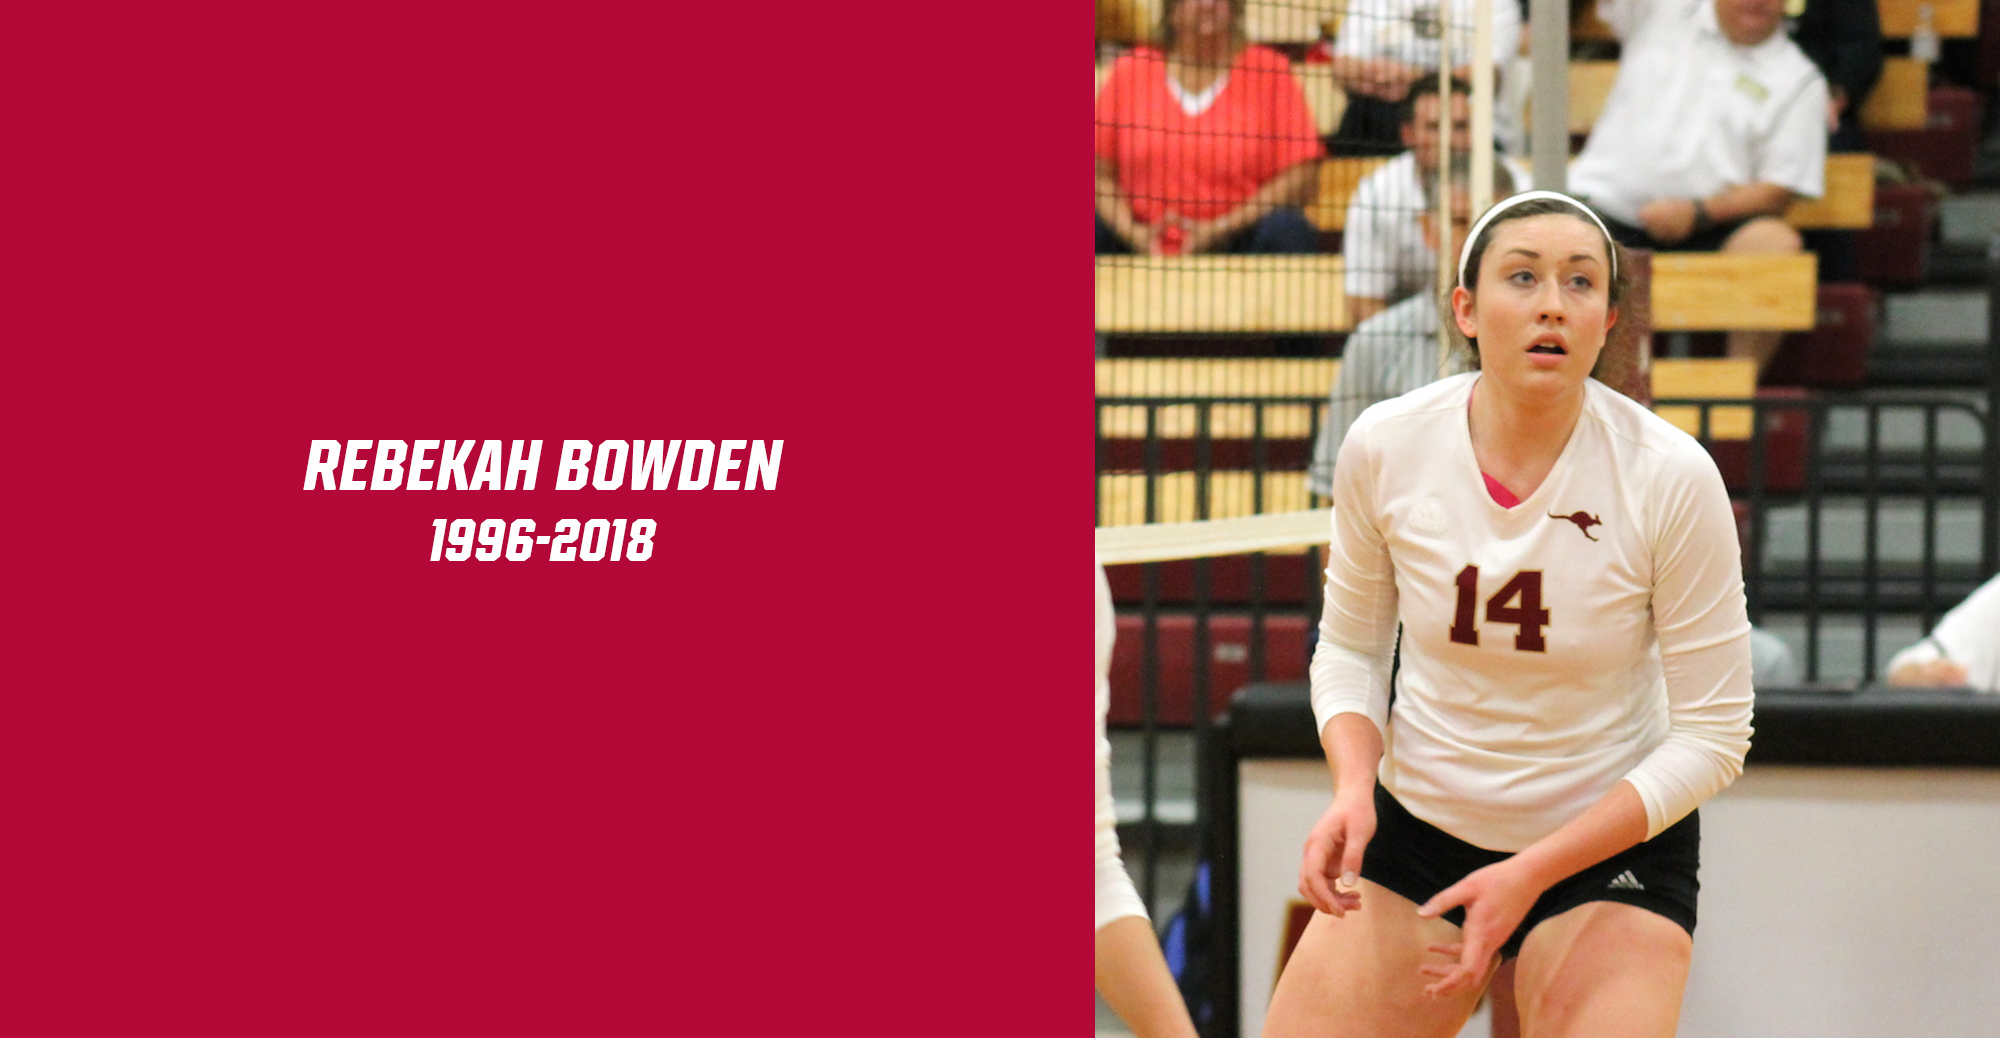 Austin College Mourns the Loss of Rebekah Bowden